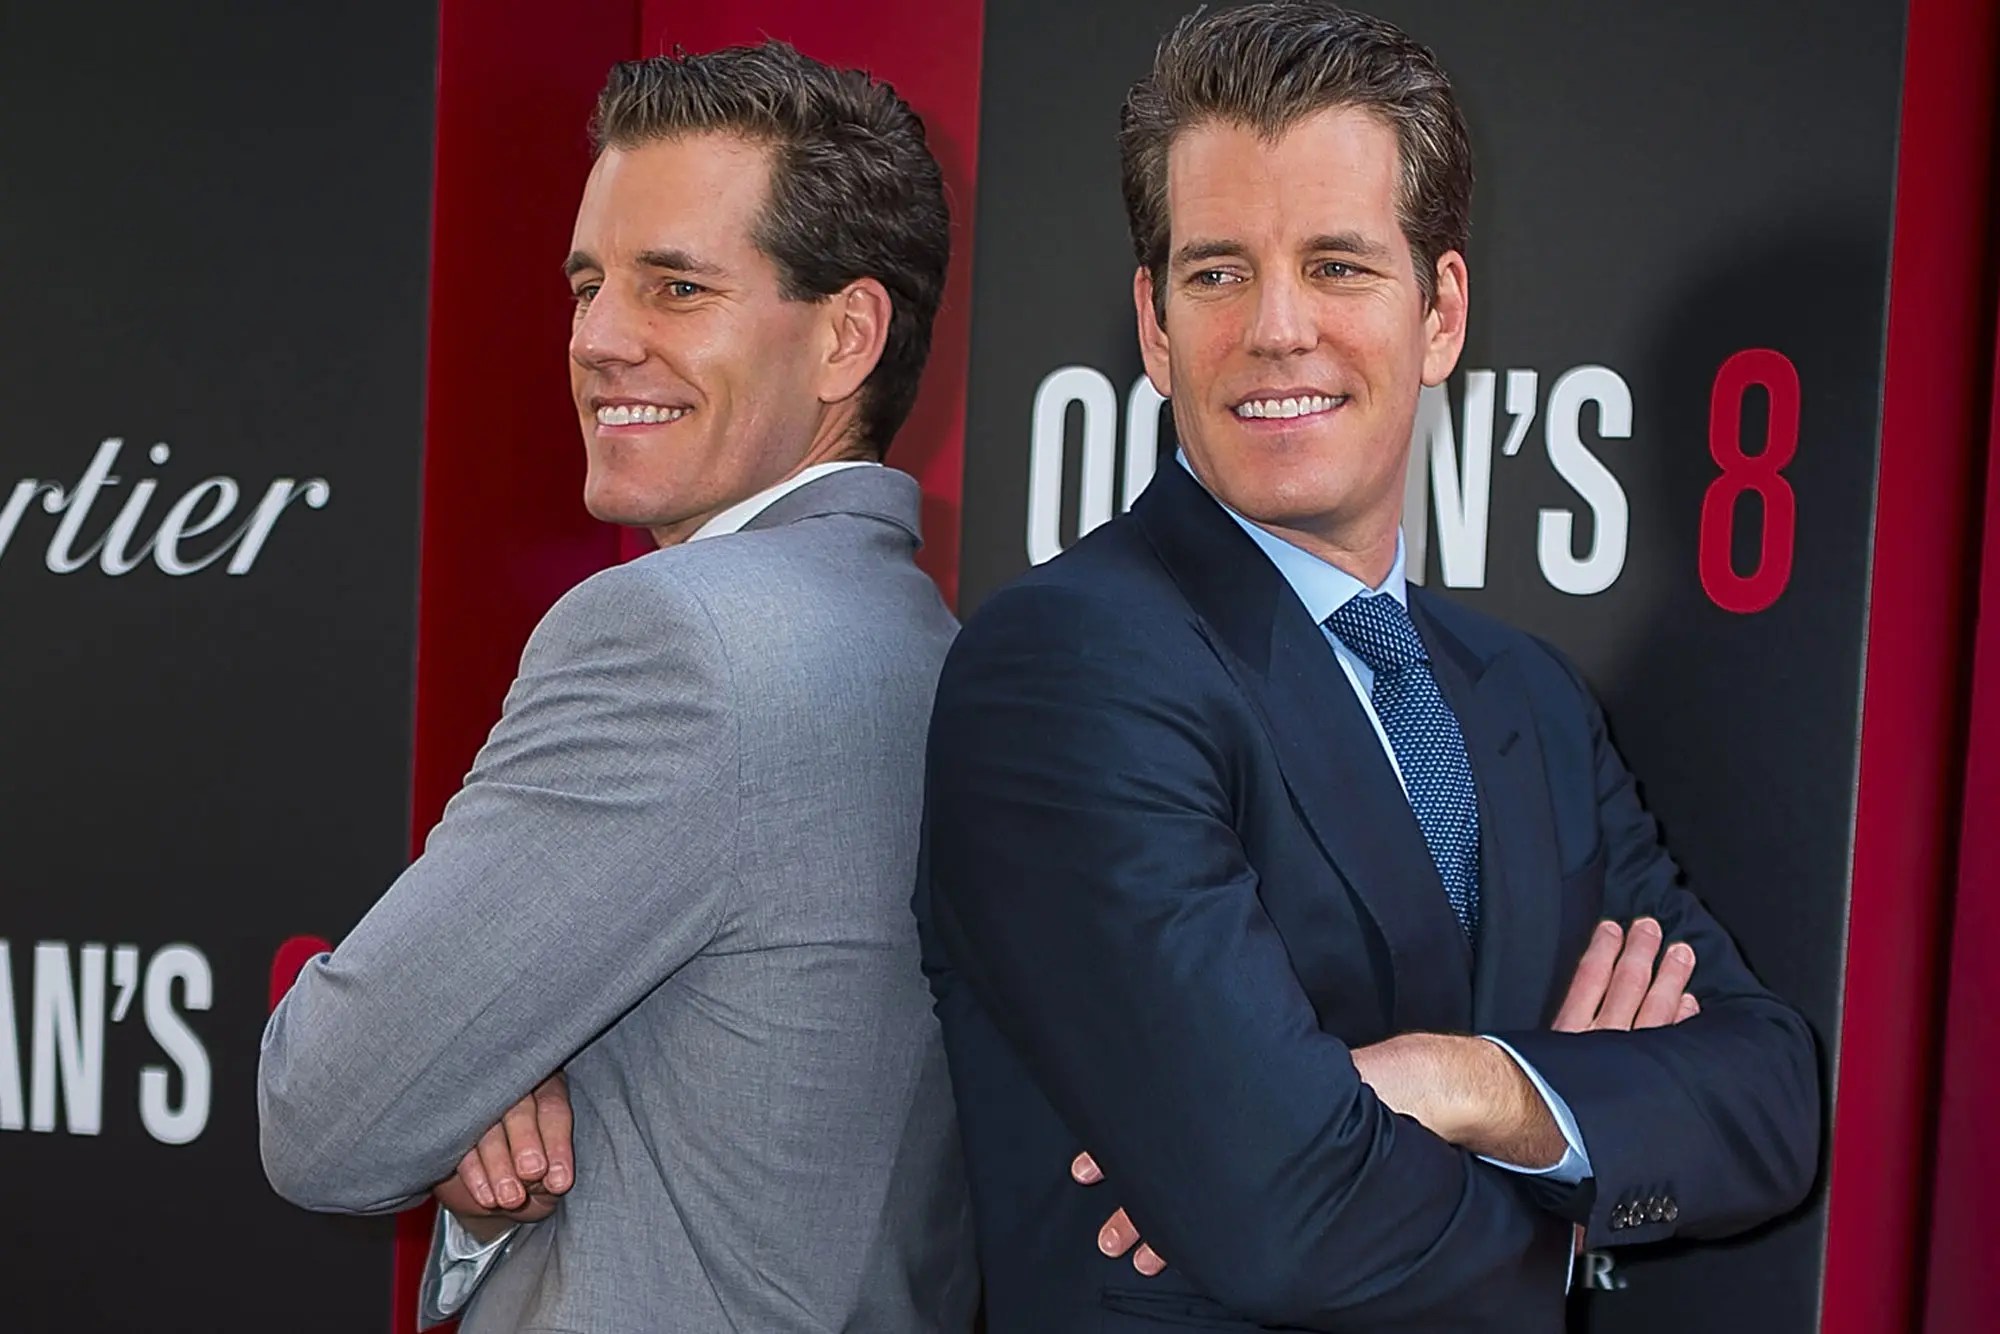 Trump Campaign Gets A Crypto Kick: $1 Million Bitcoin From Winklevoss Twins